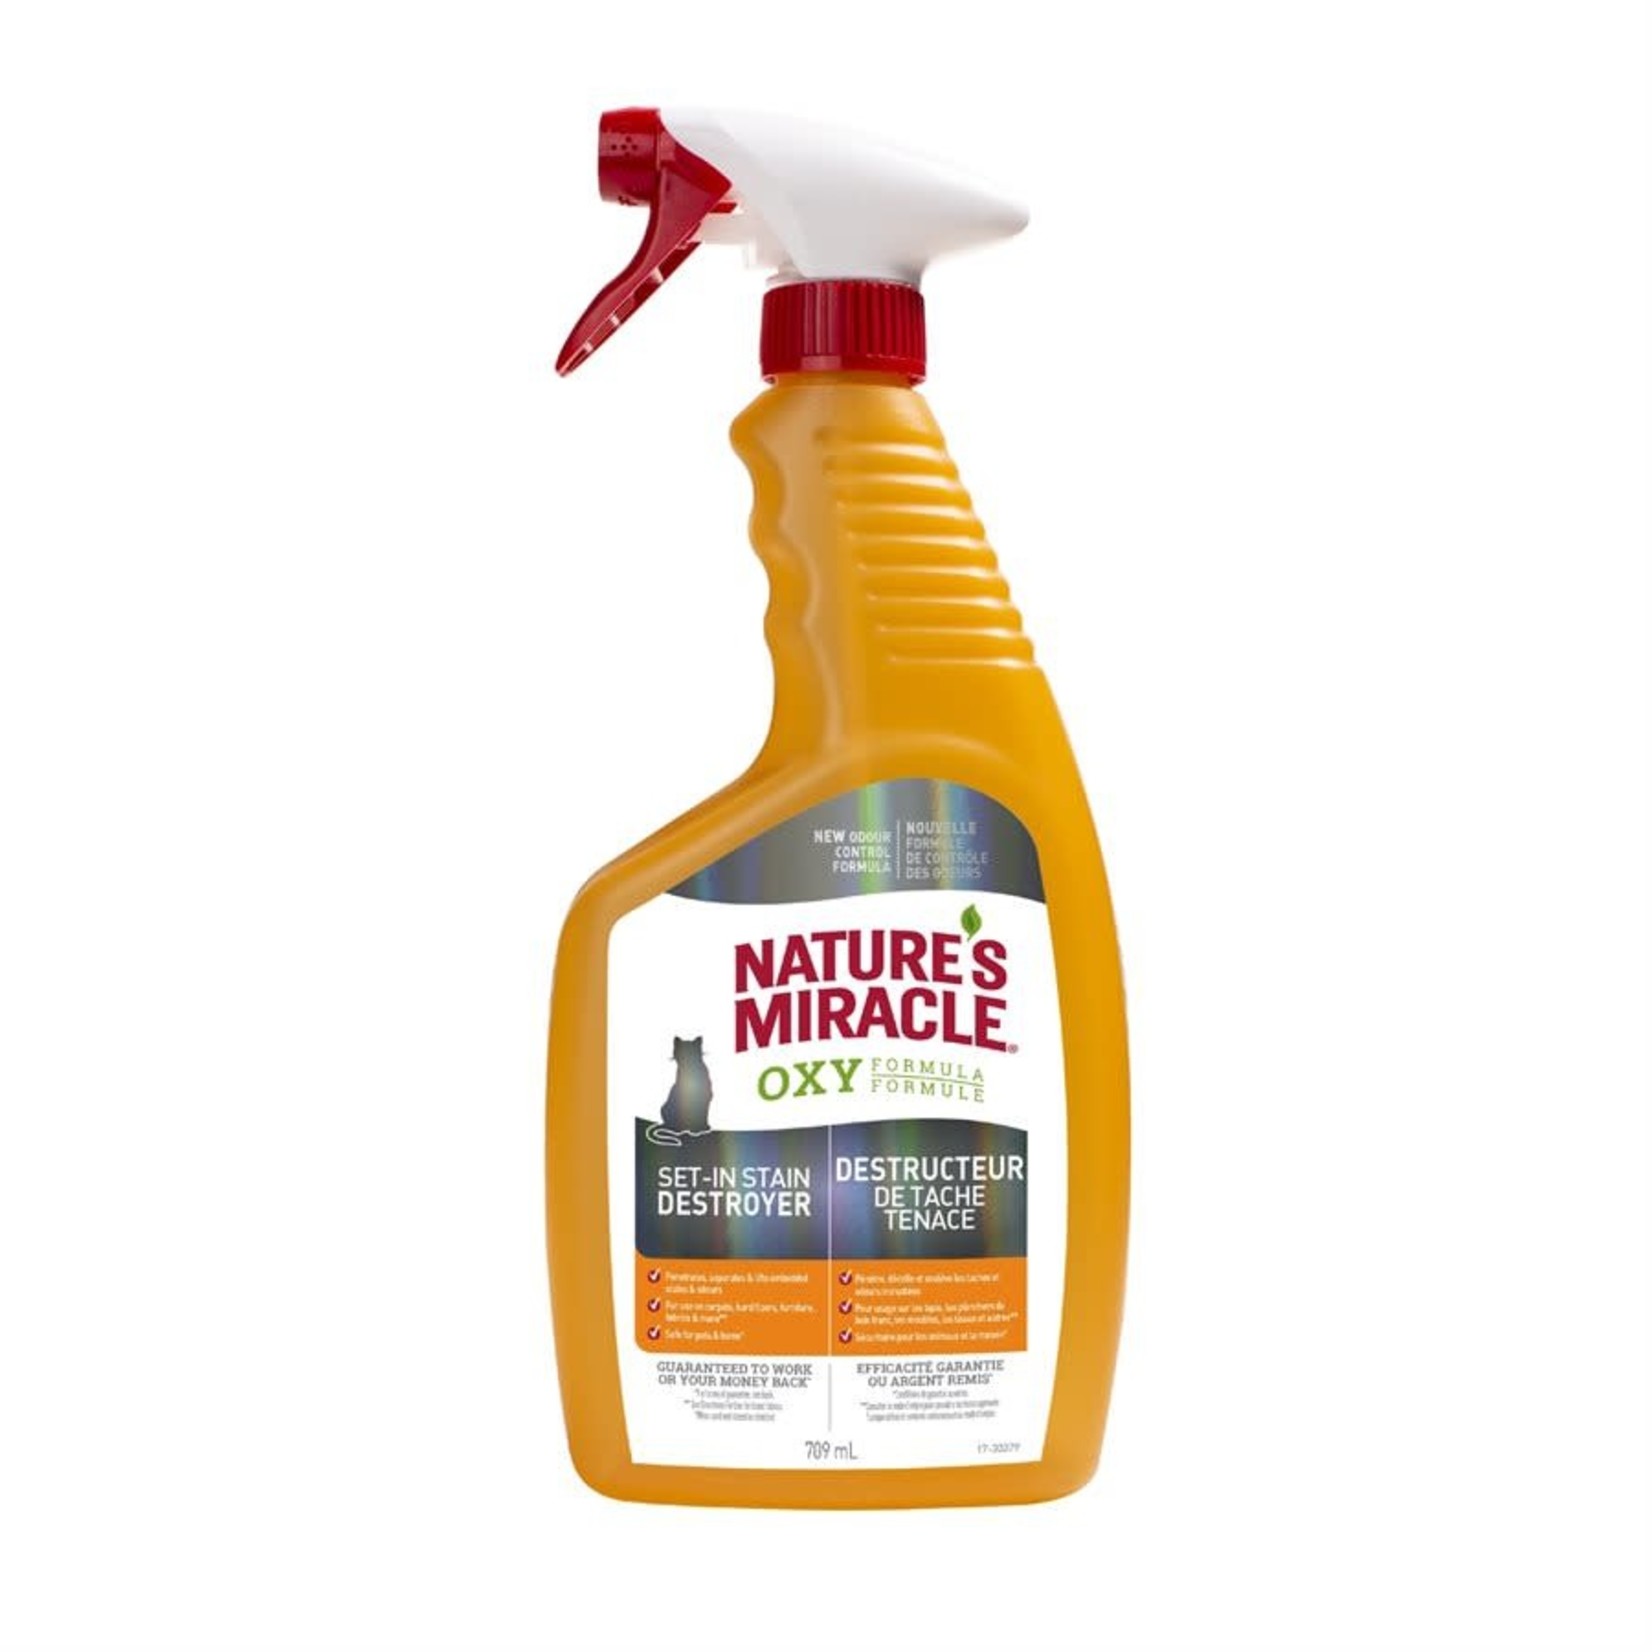 NATURES MIRACLE Nature's Miracle Just for Cats Orange Oxy Stain & Odor Remover Spray 24oz